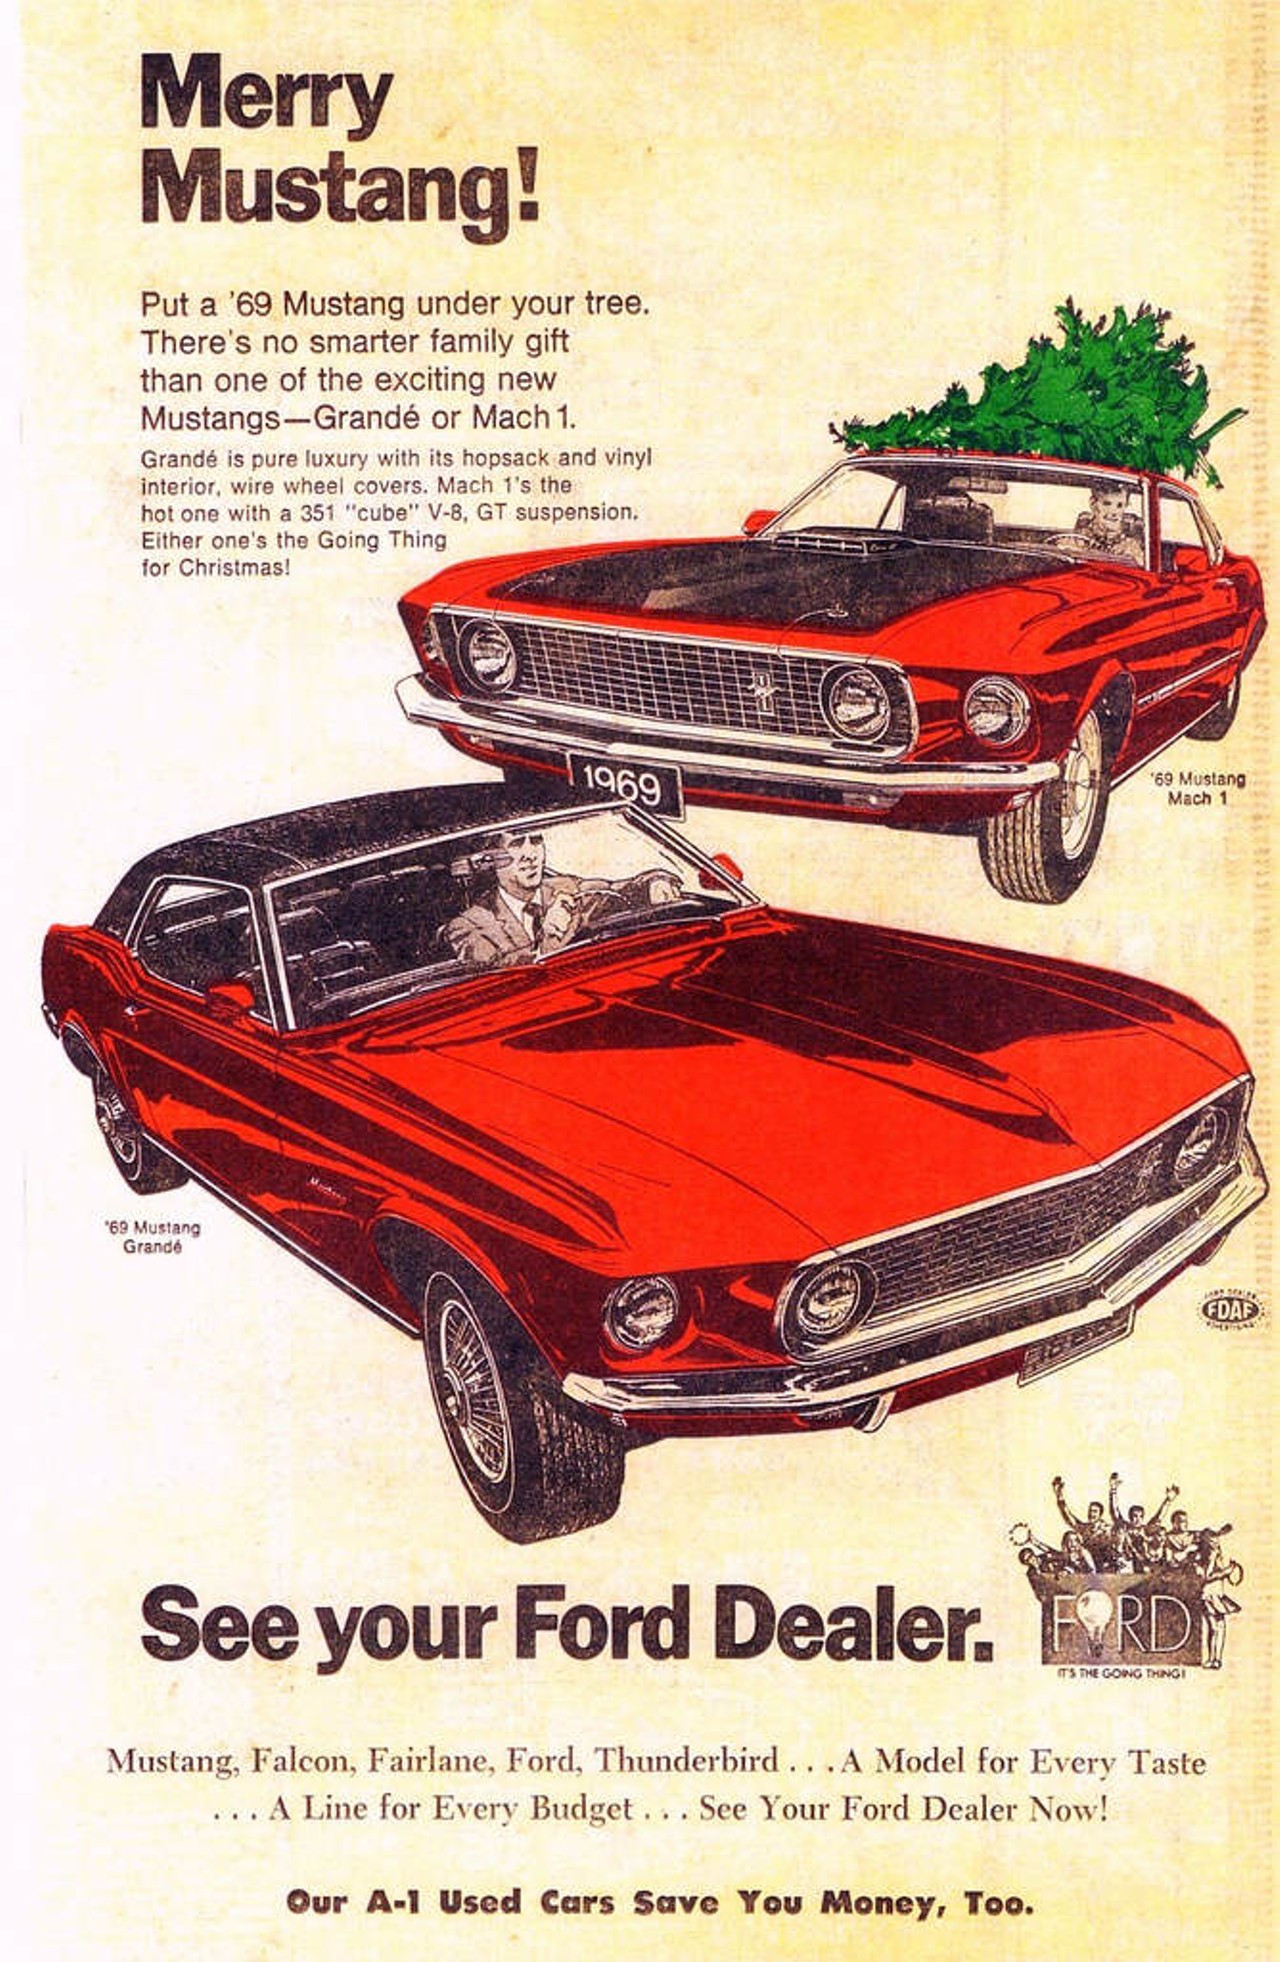 Ford Mustang Mach 1 and Grandé, 1969